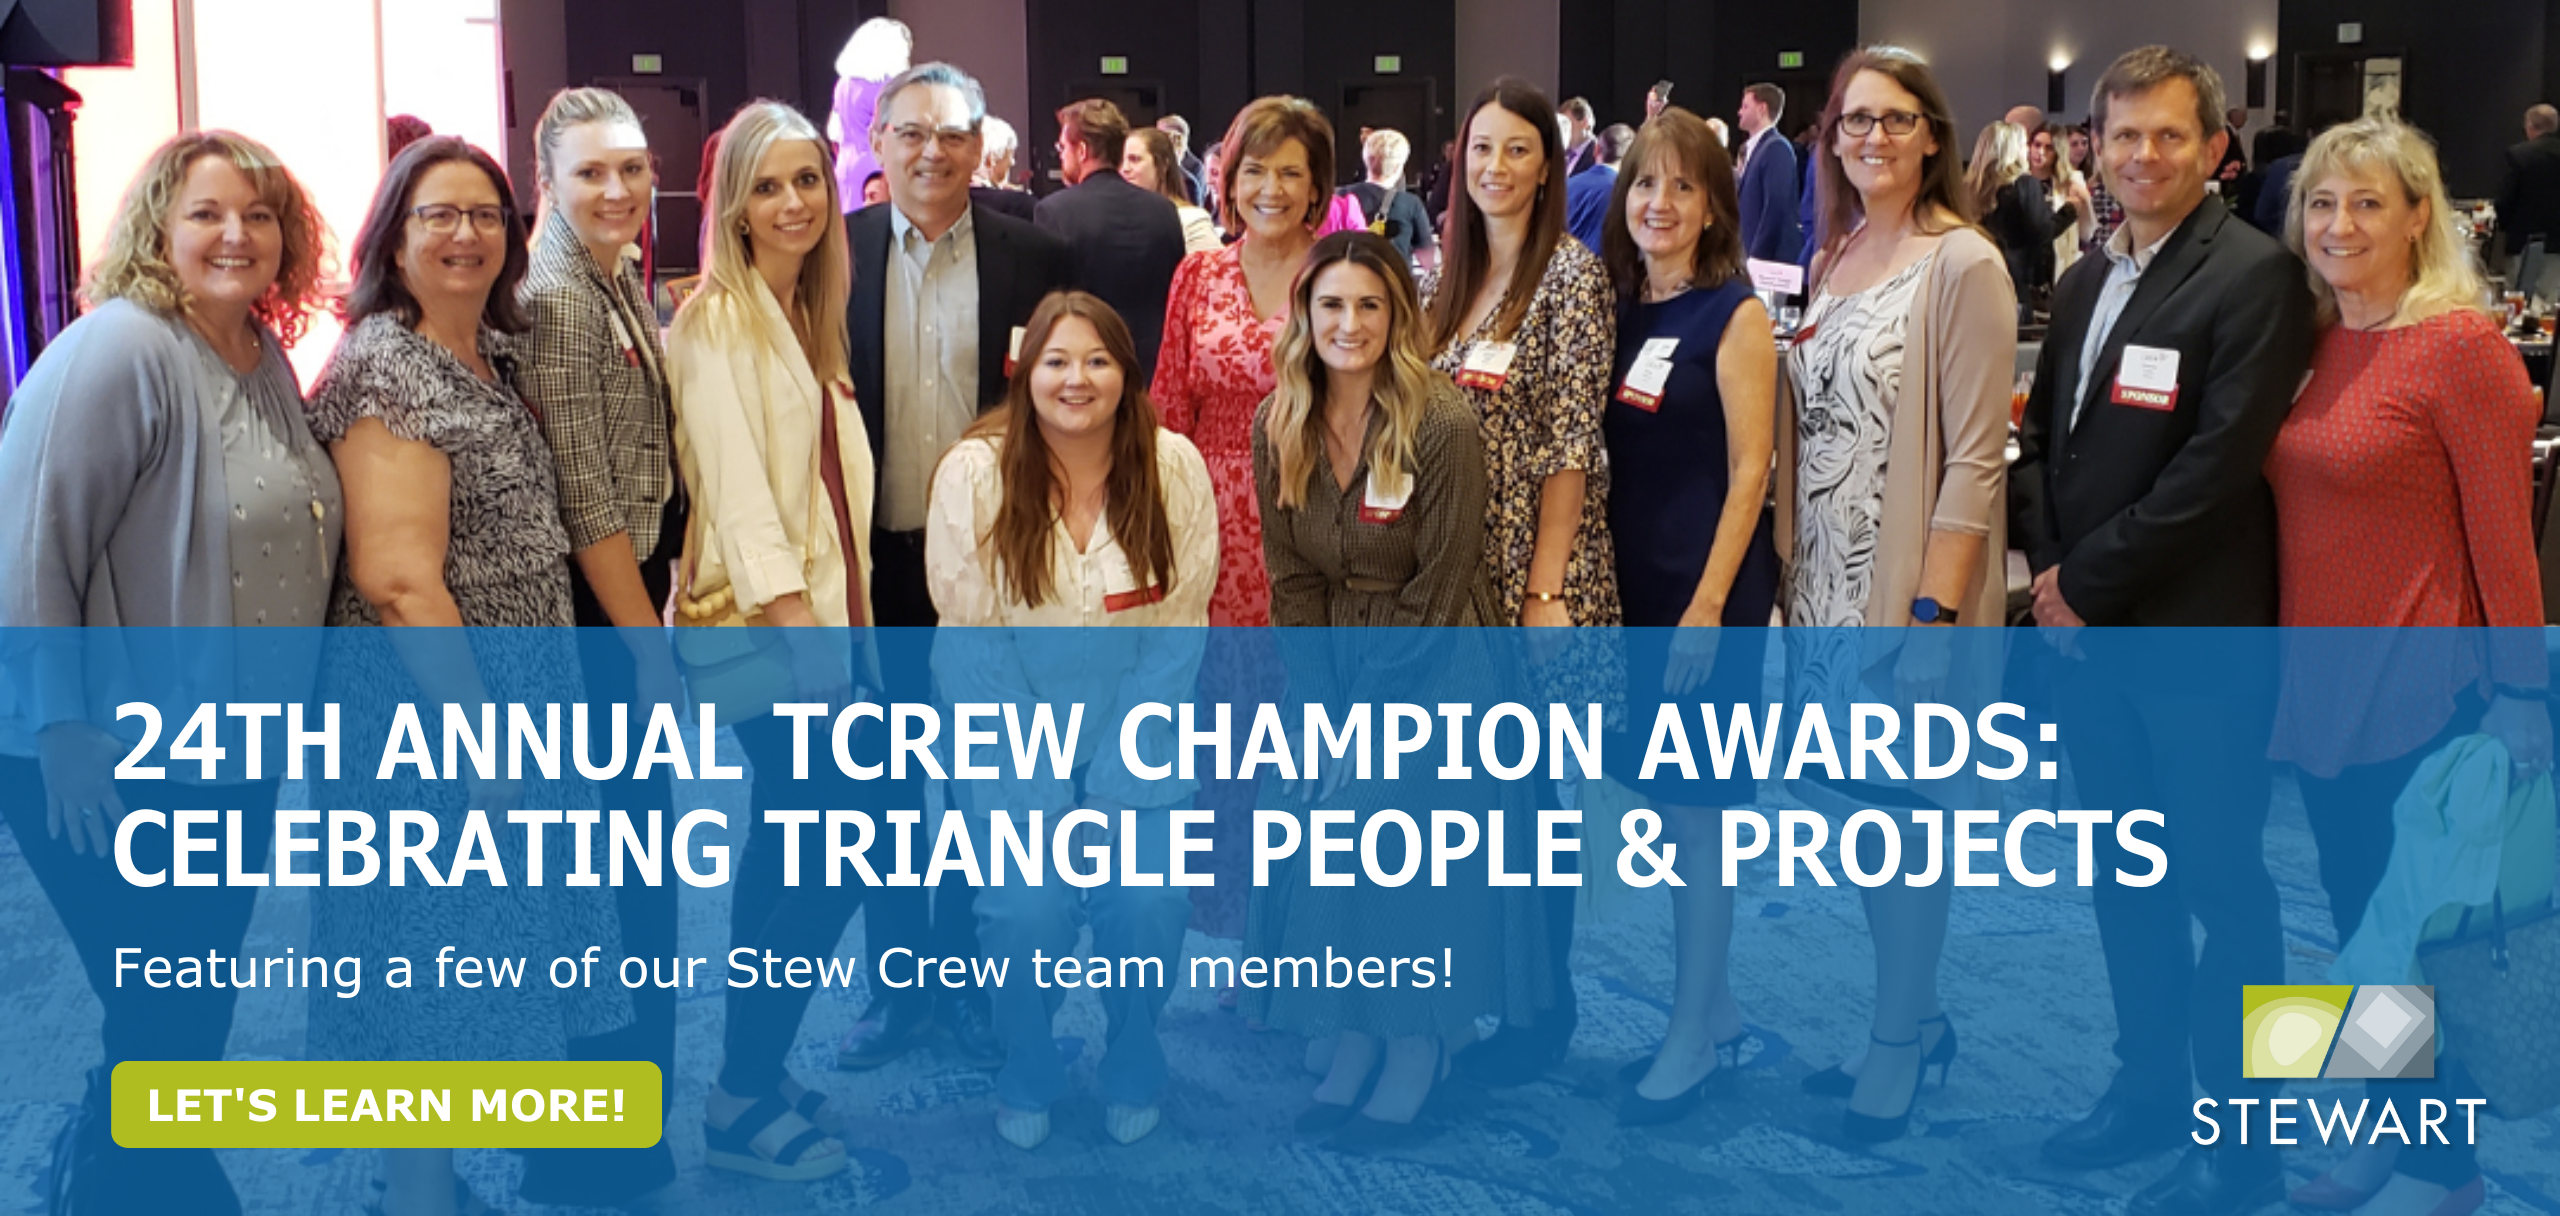 24th ANNUAL TCREW CHAMPION AWARDS: CELEBRATING TRIANGLE PEOPLE & PROJECTS